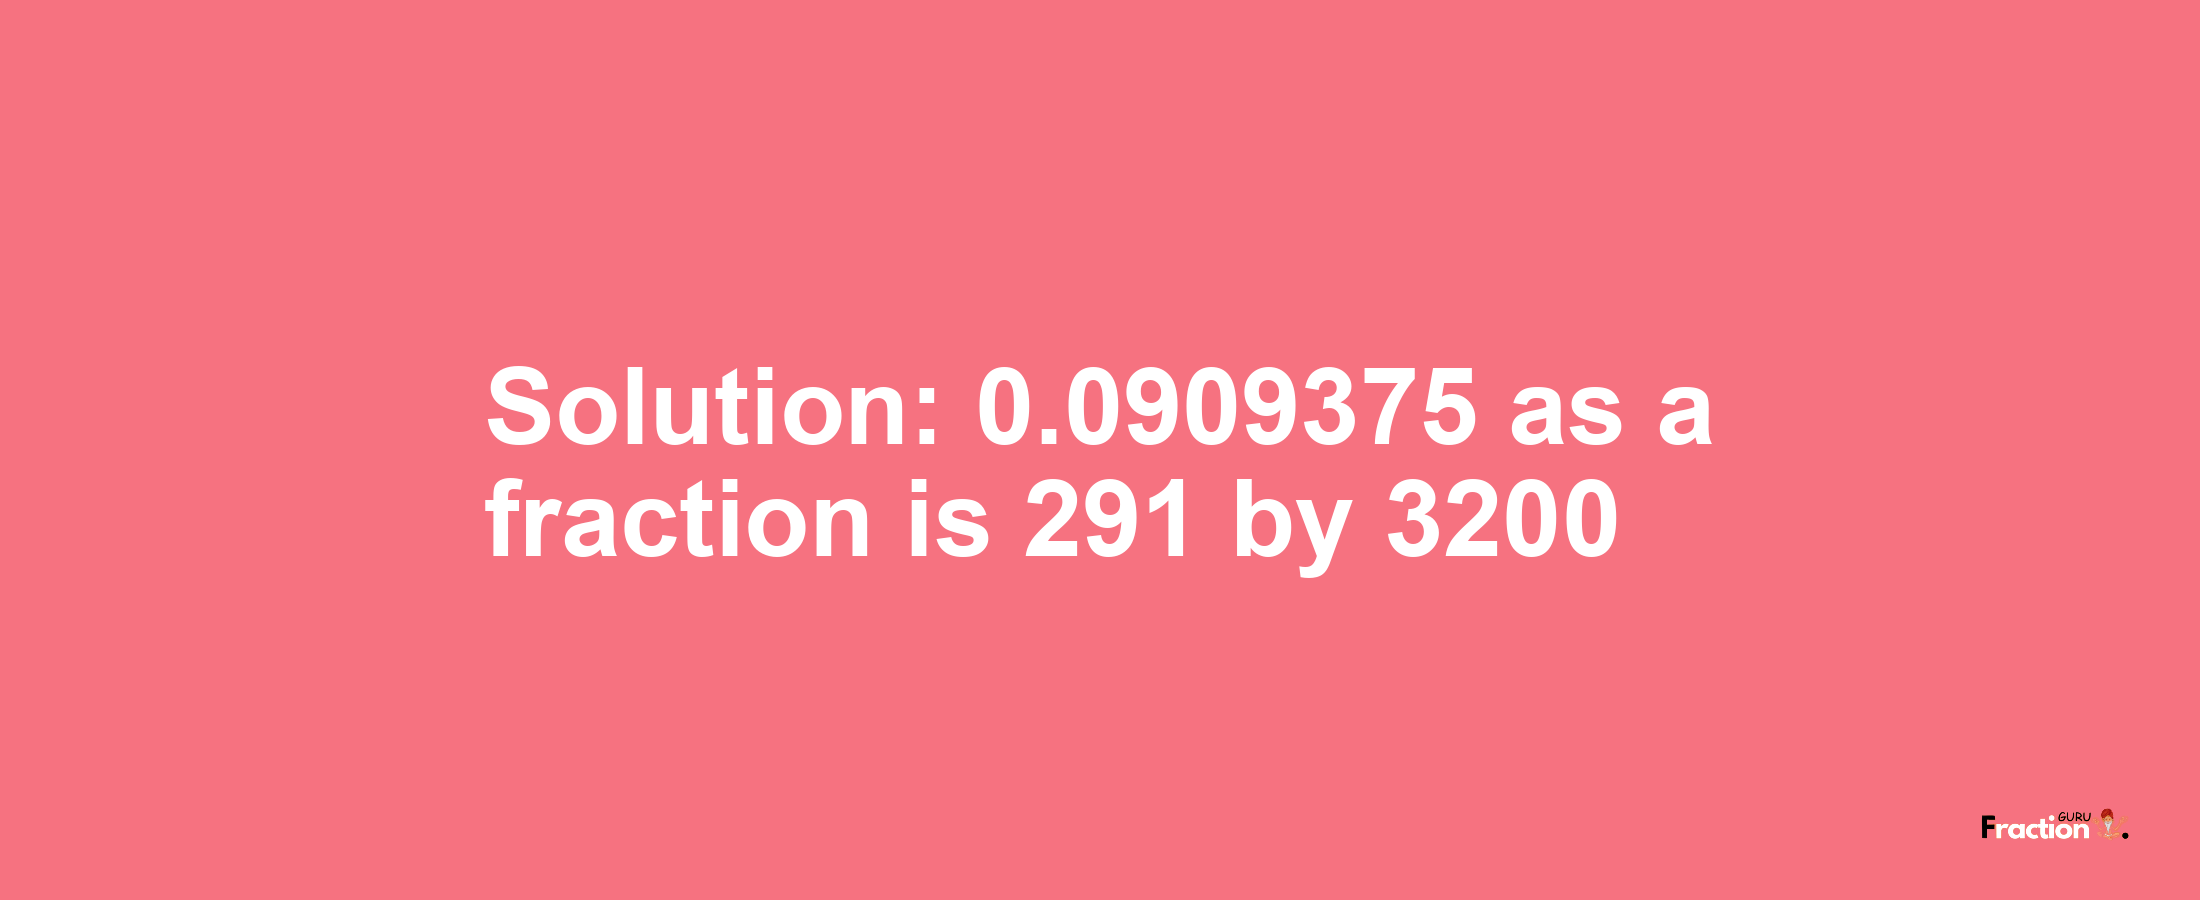 Solution:0.0909375 as a fraction is 291/3200